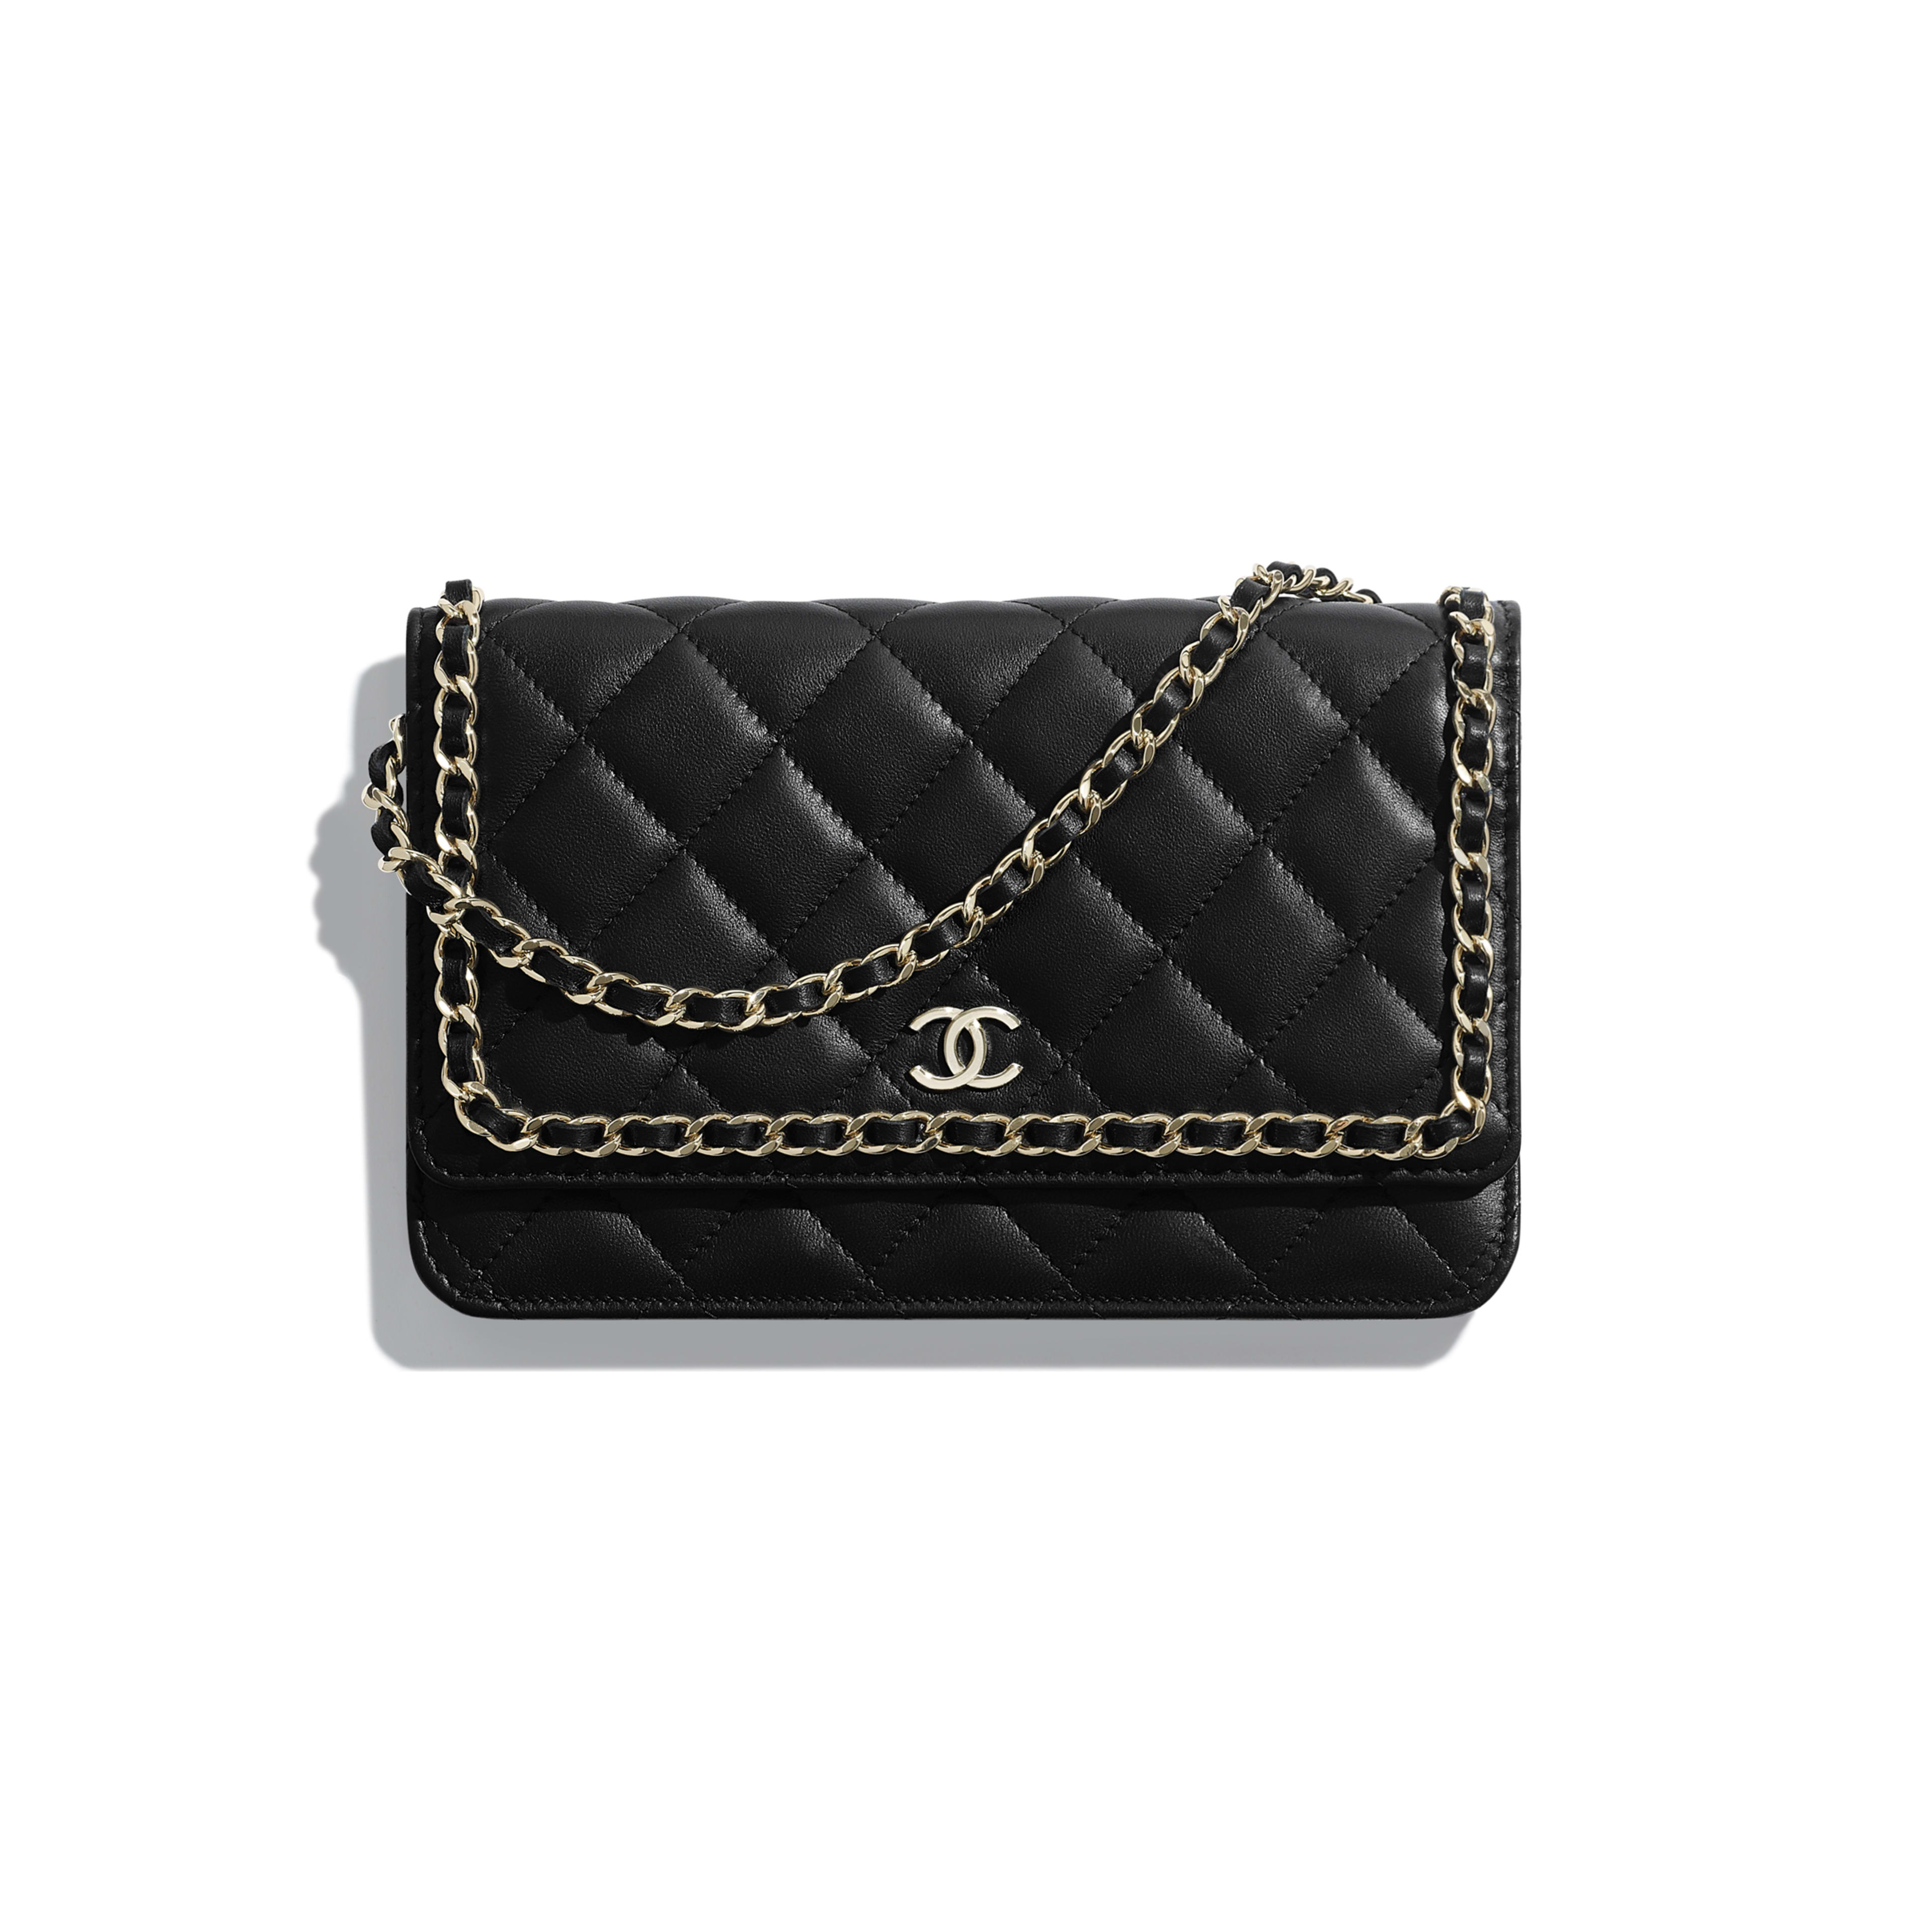 Wallet on chain leather handbag Chanel Black in Leather - 37163560